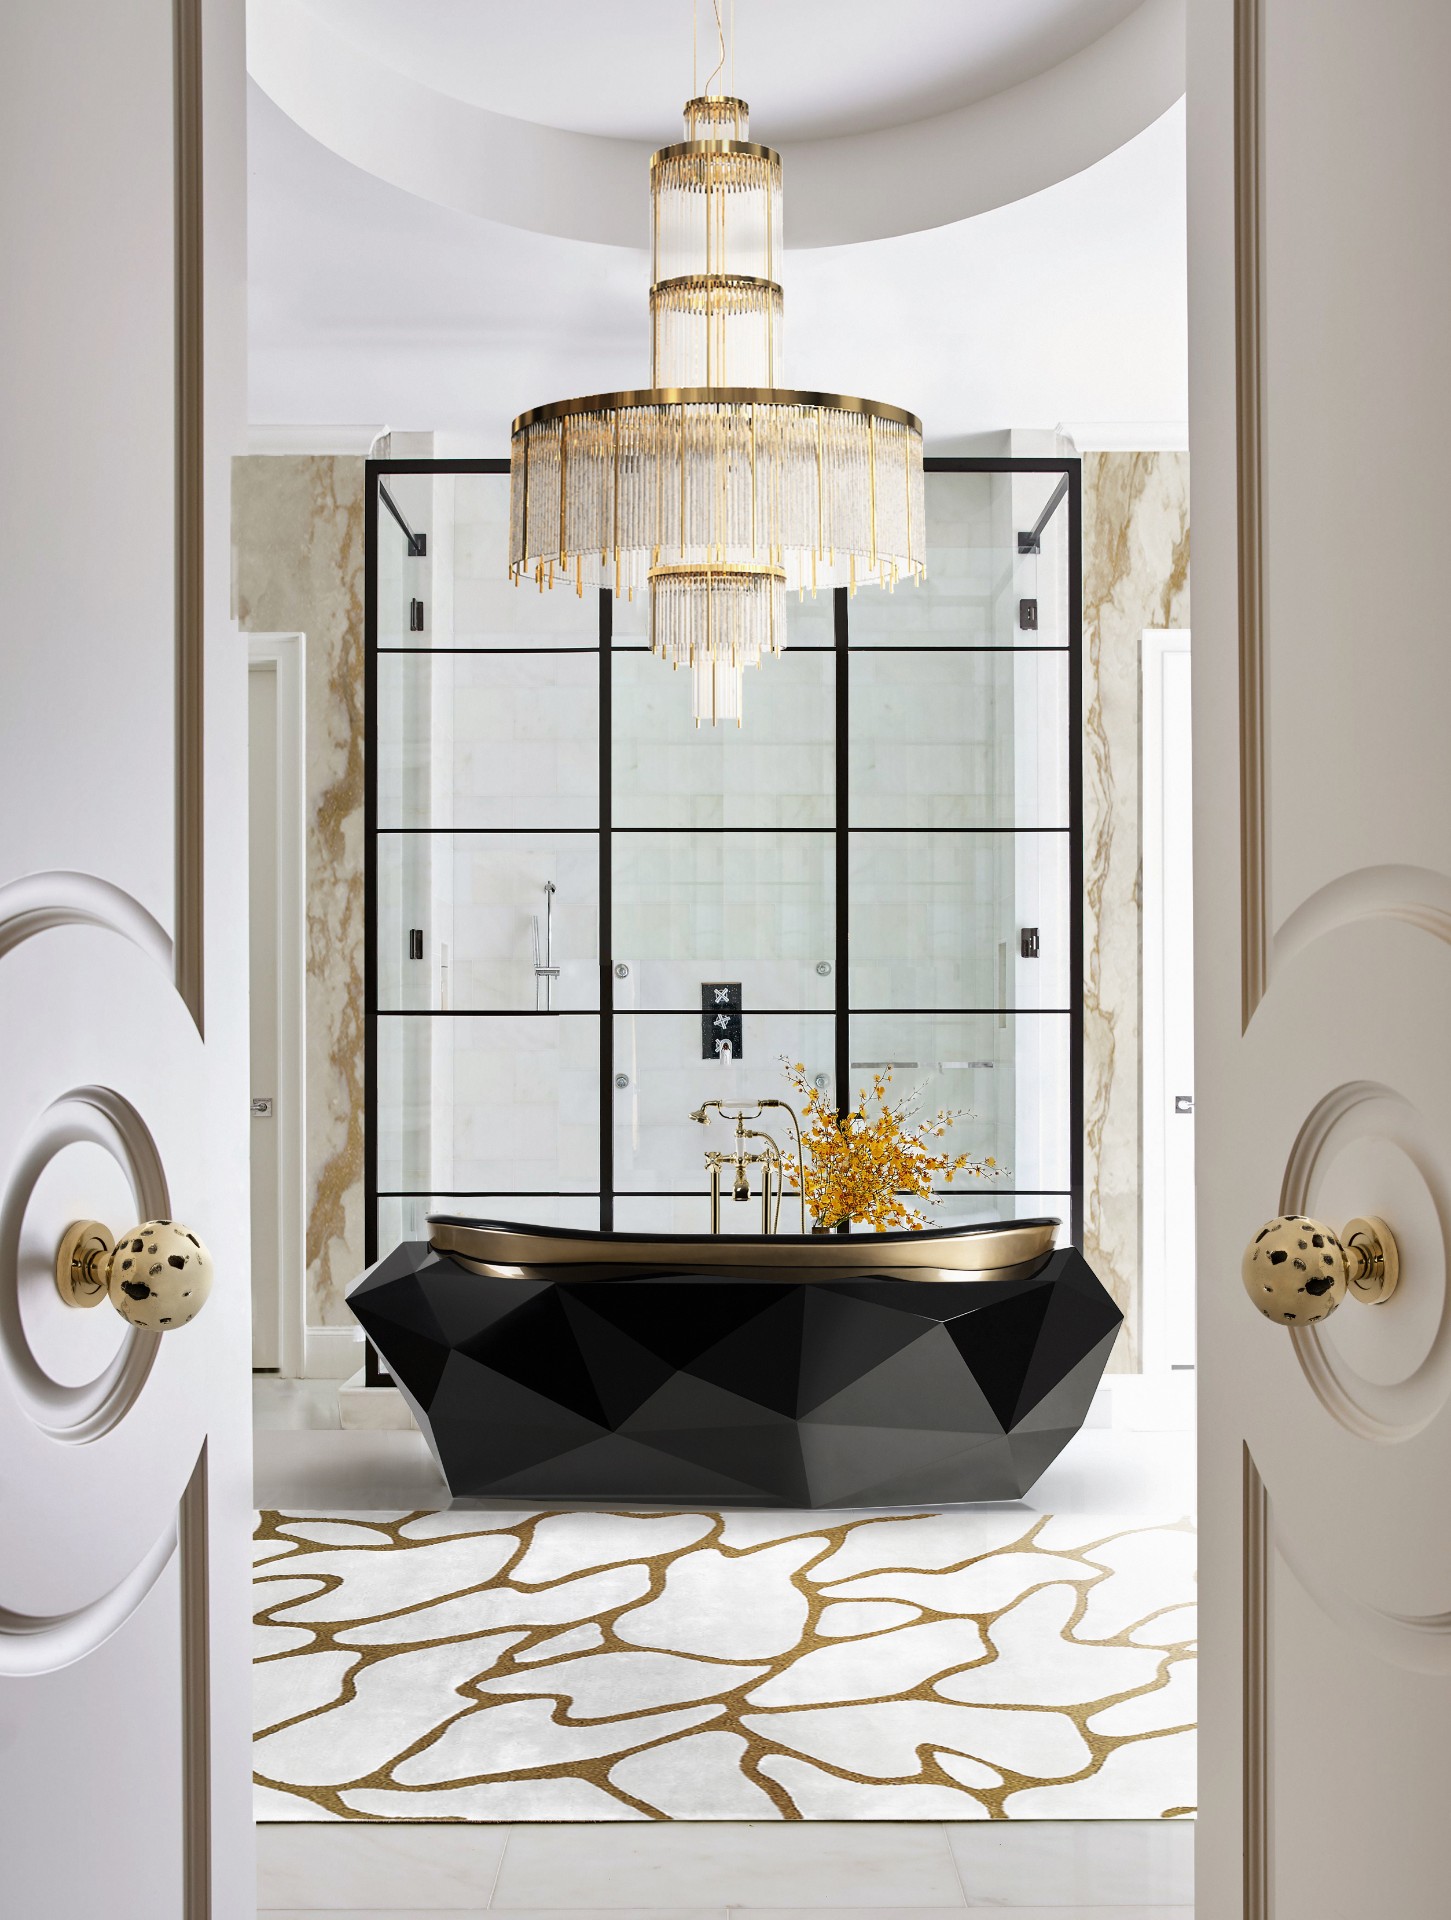 Some Amazing Luxury Inspirations for Your Bathroom